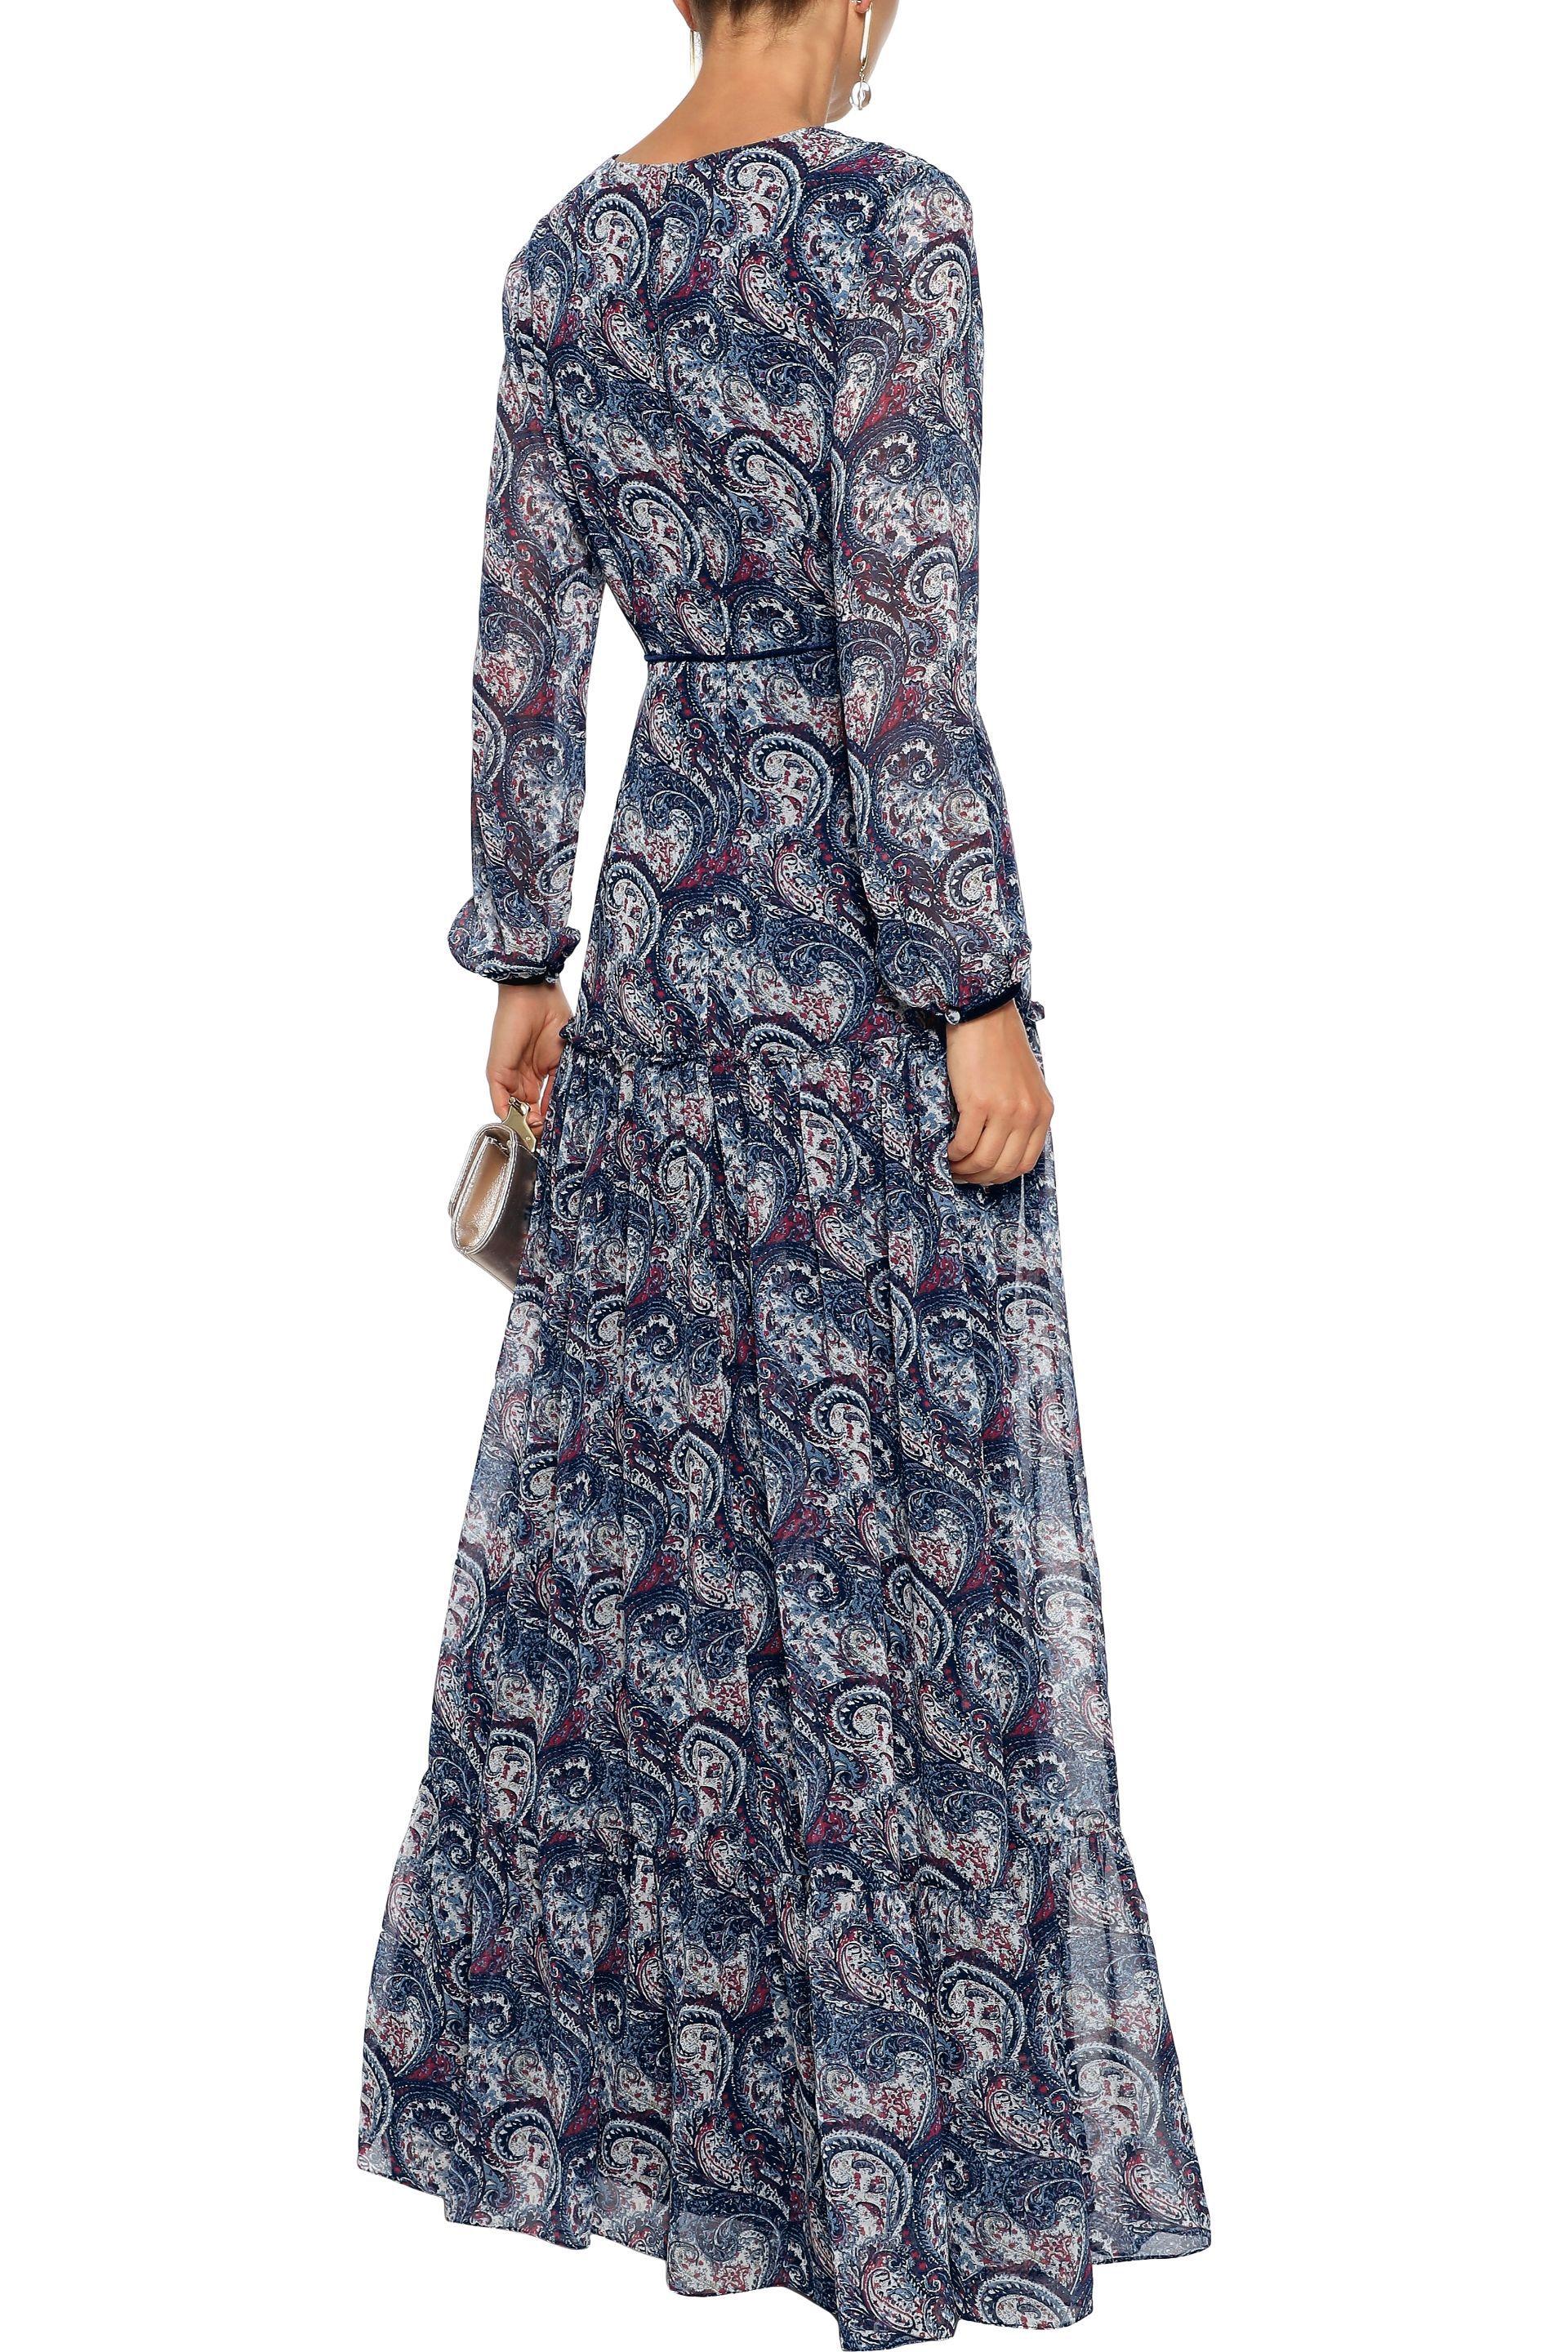 Mikael Aghal Velvet-trimmed Printed Chiffon Maxi Dress Navy in Blue - Lyst